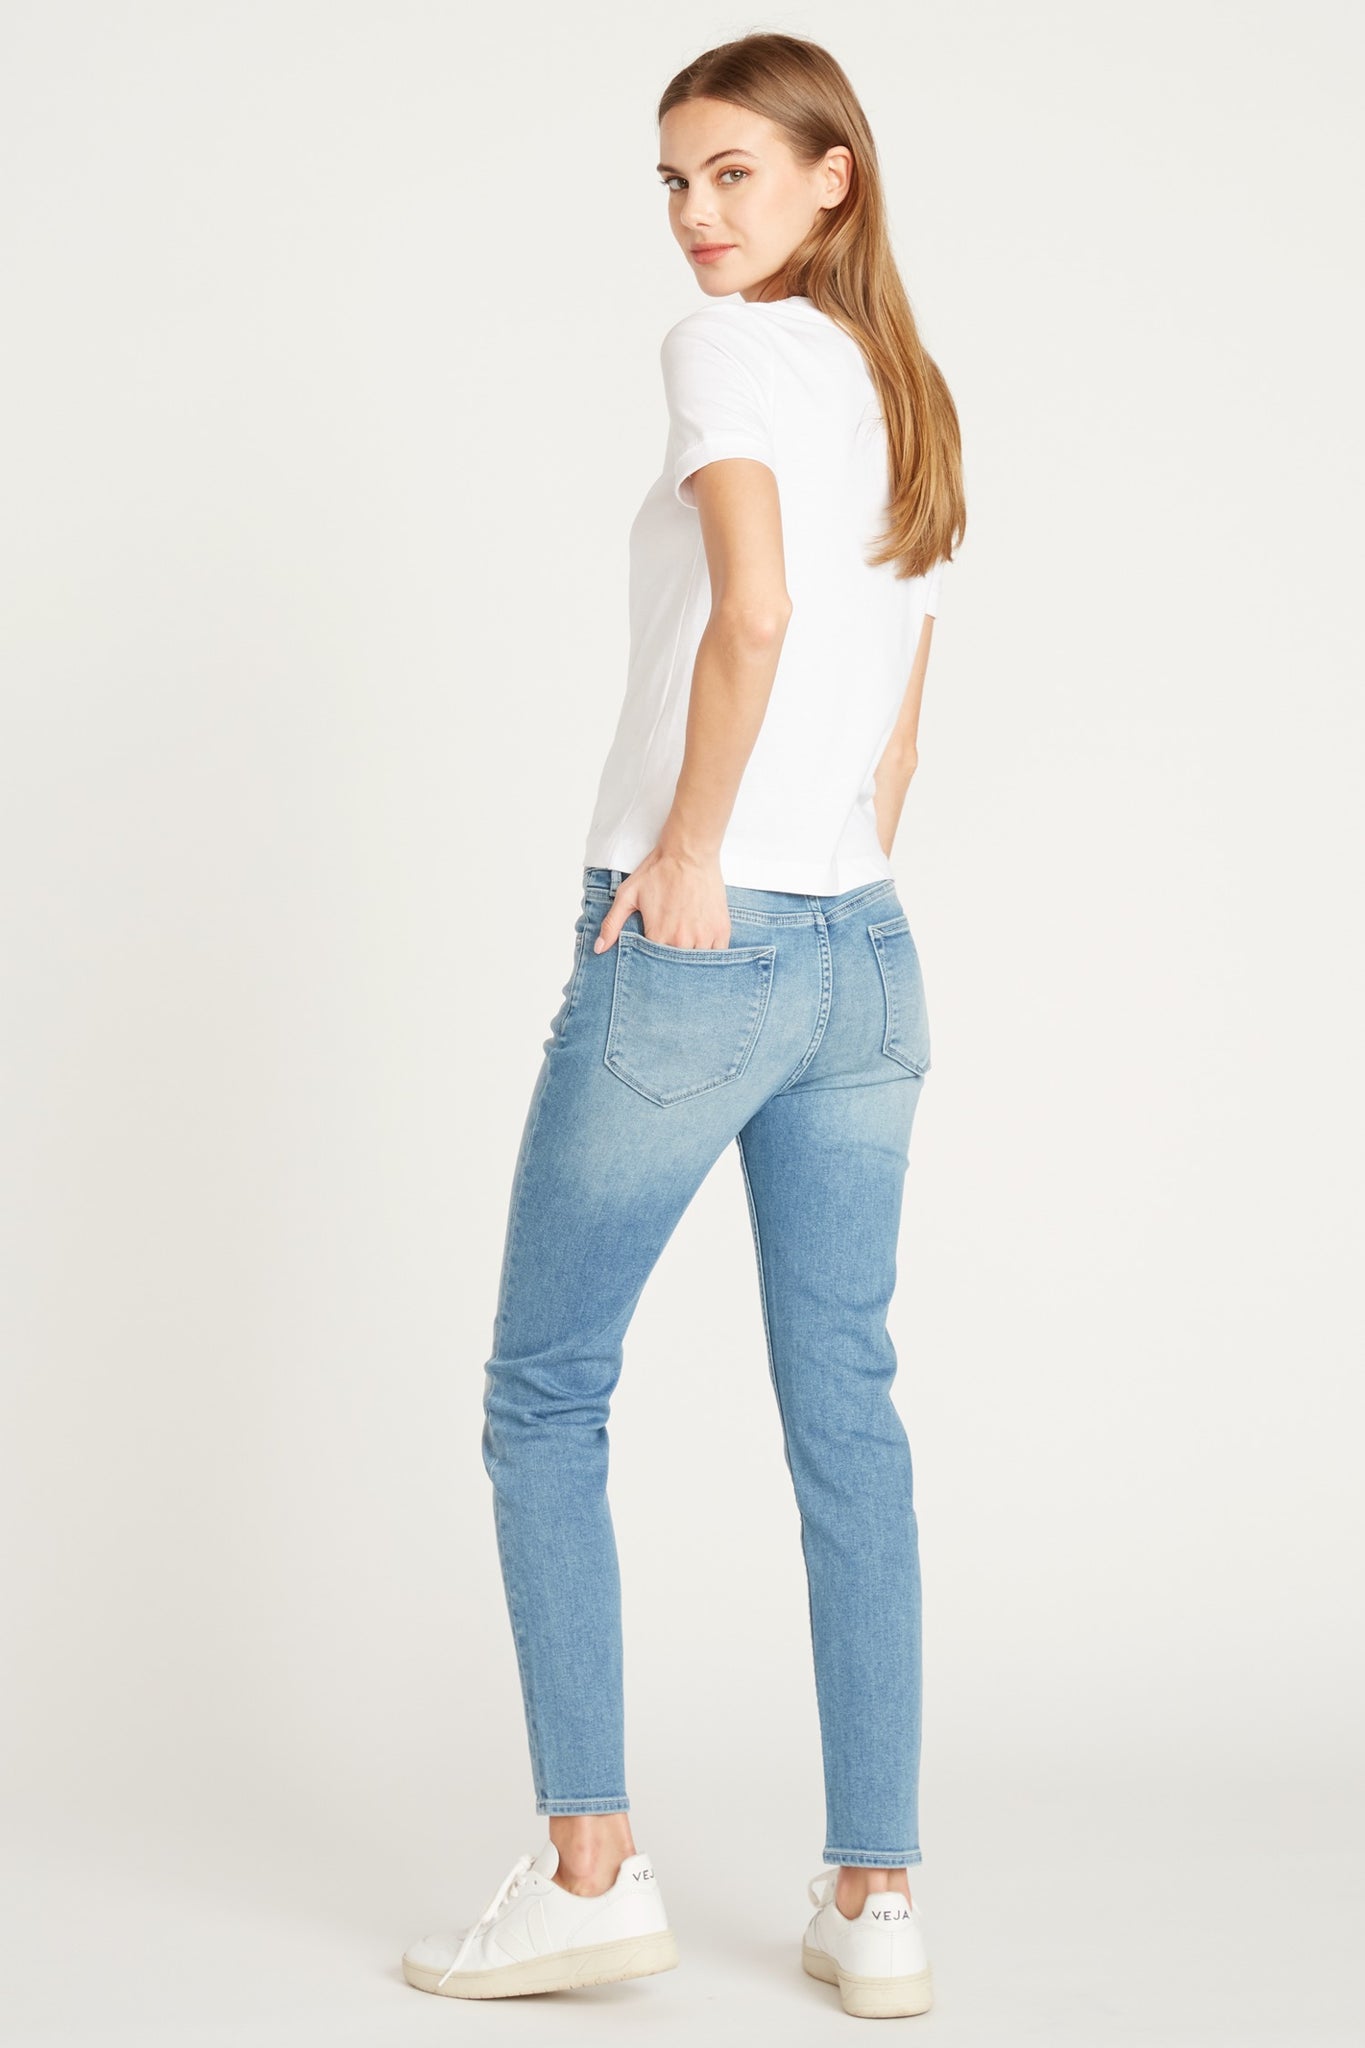 Load image into Gallery viewer, MARLEY MID SKINNY LEG - LIGHT WASH
